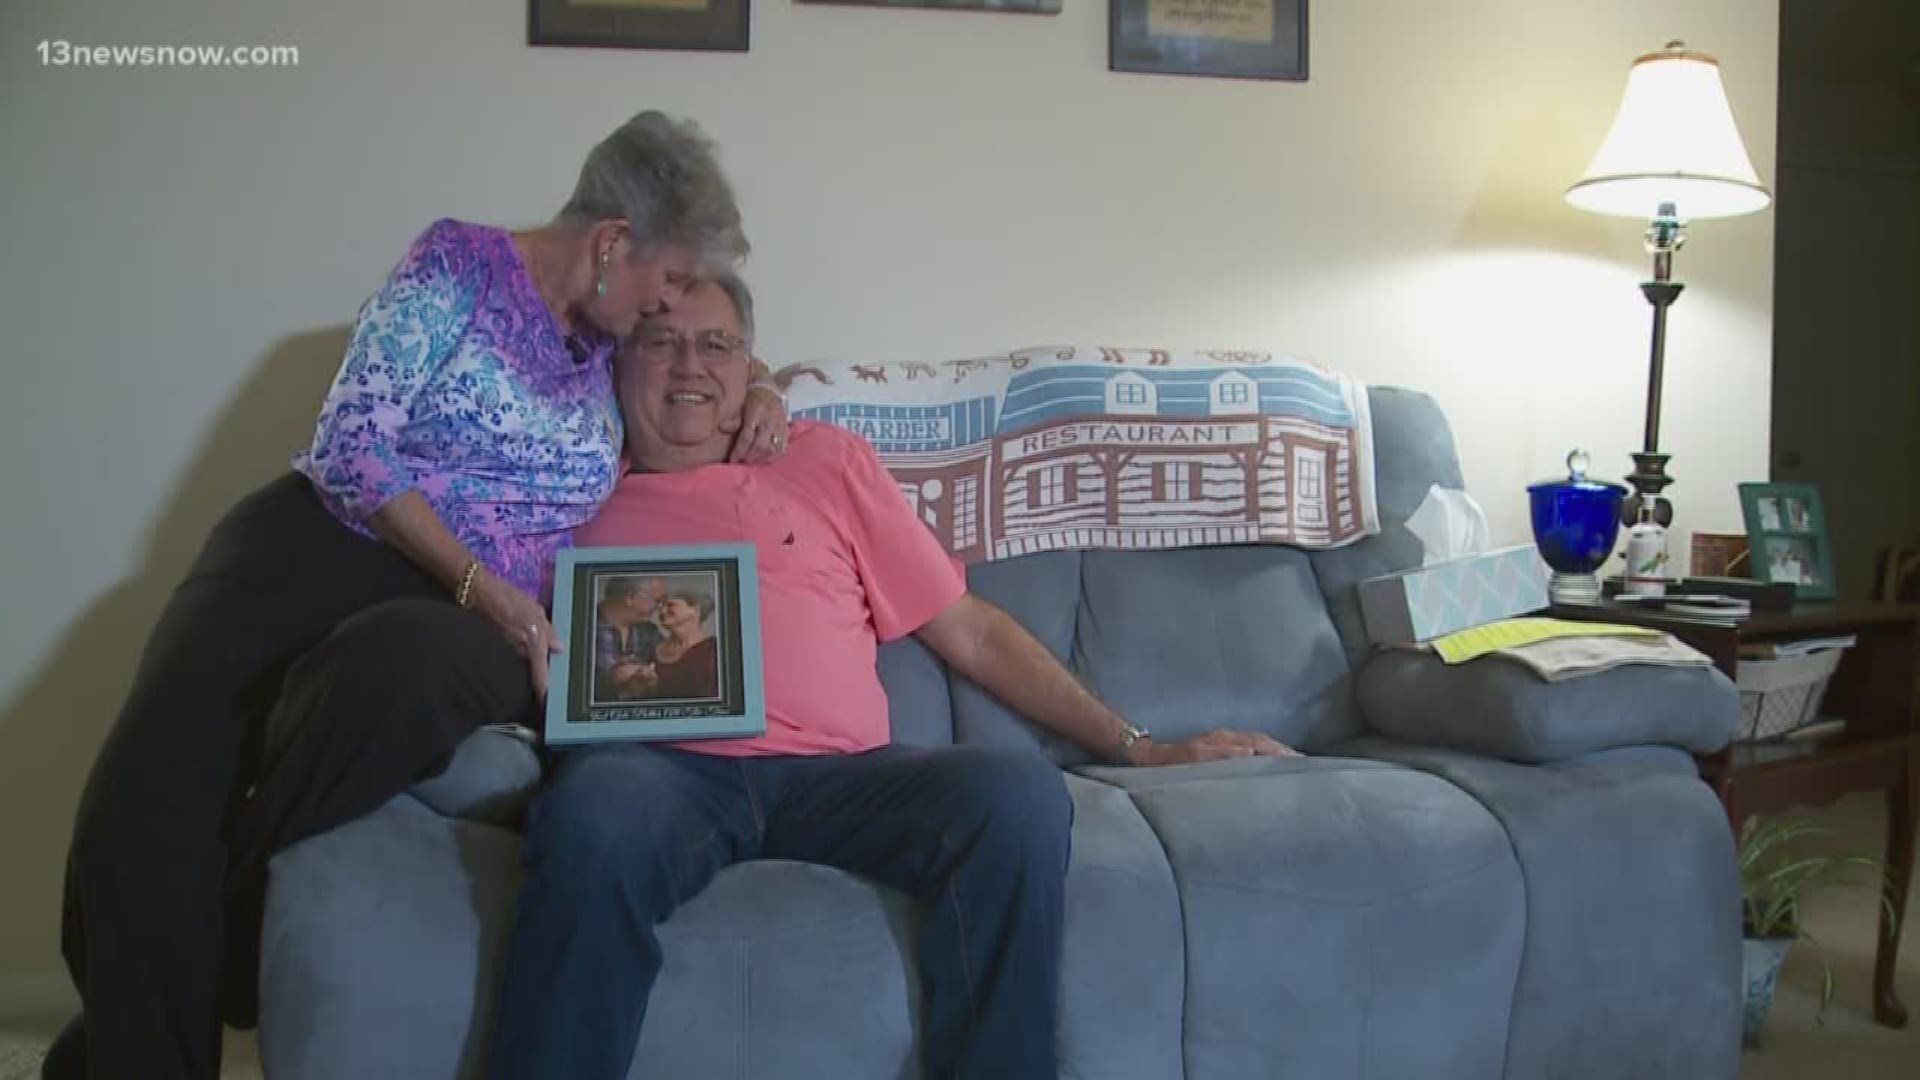 According to a study from the American Academy of Neurology, those with sleep apnea may be at a higher risk of developing Alzheimer's. Liz and Wally Osgood are from Chesapeake and Wally is living with the disease.